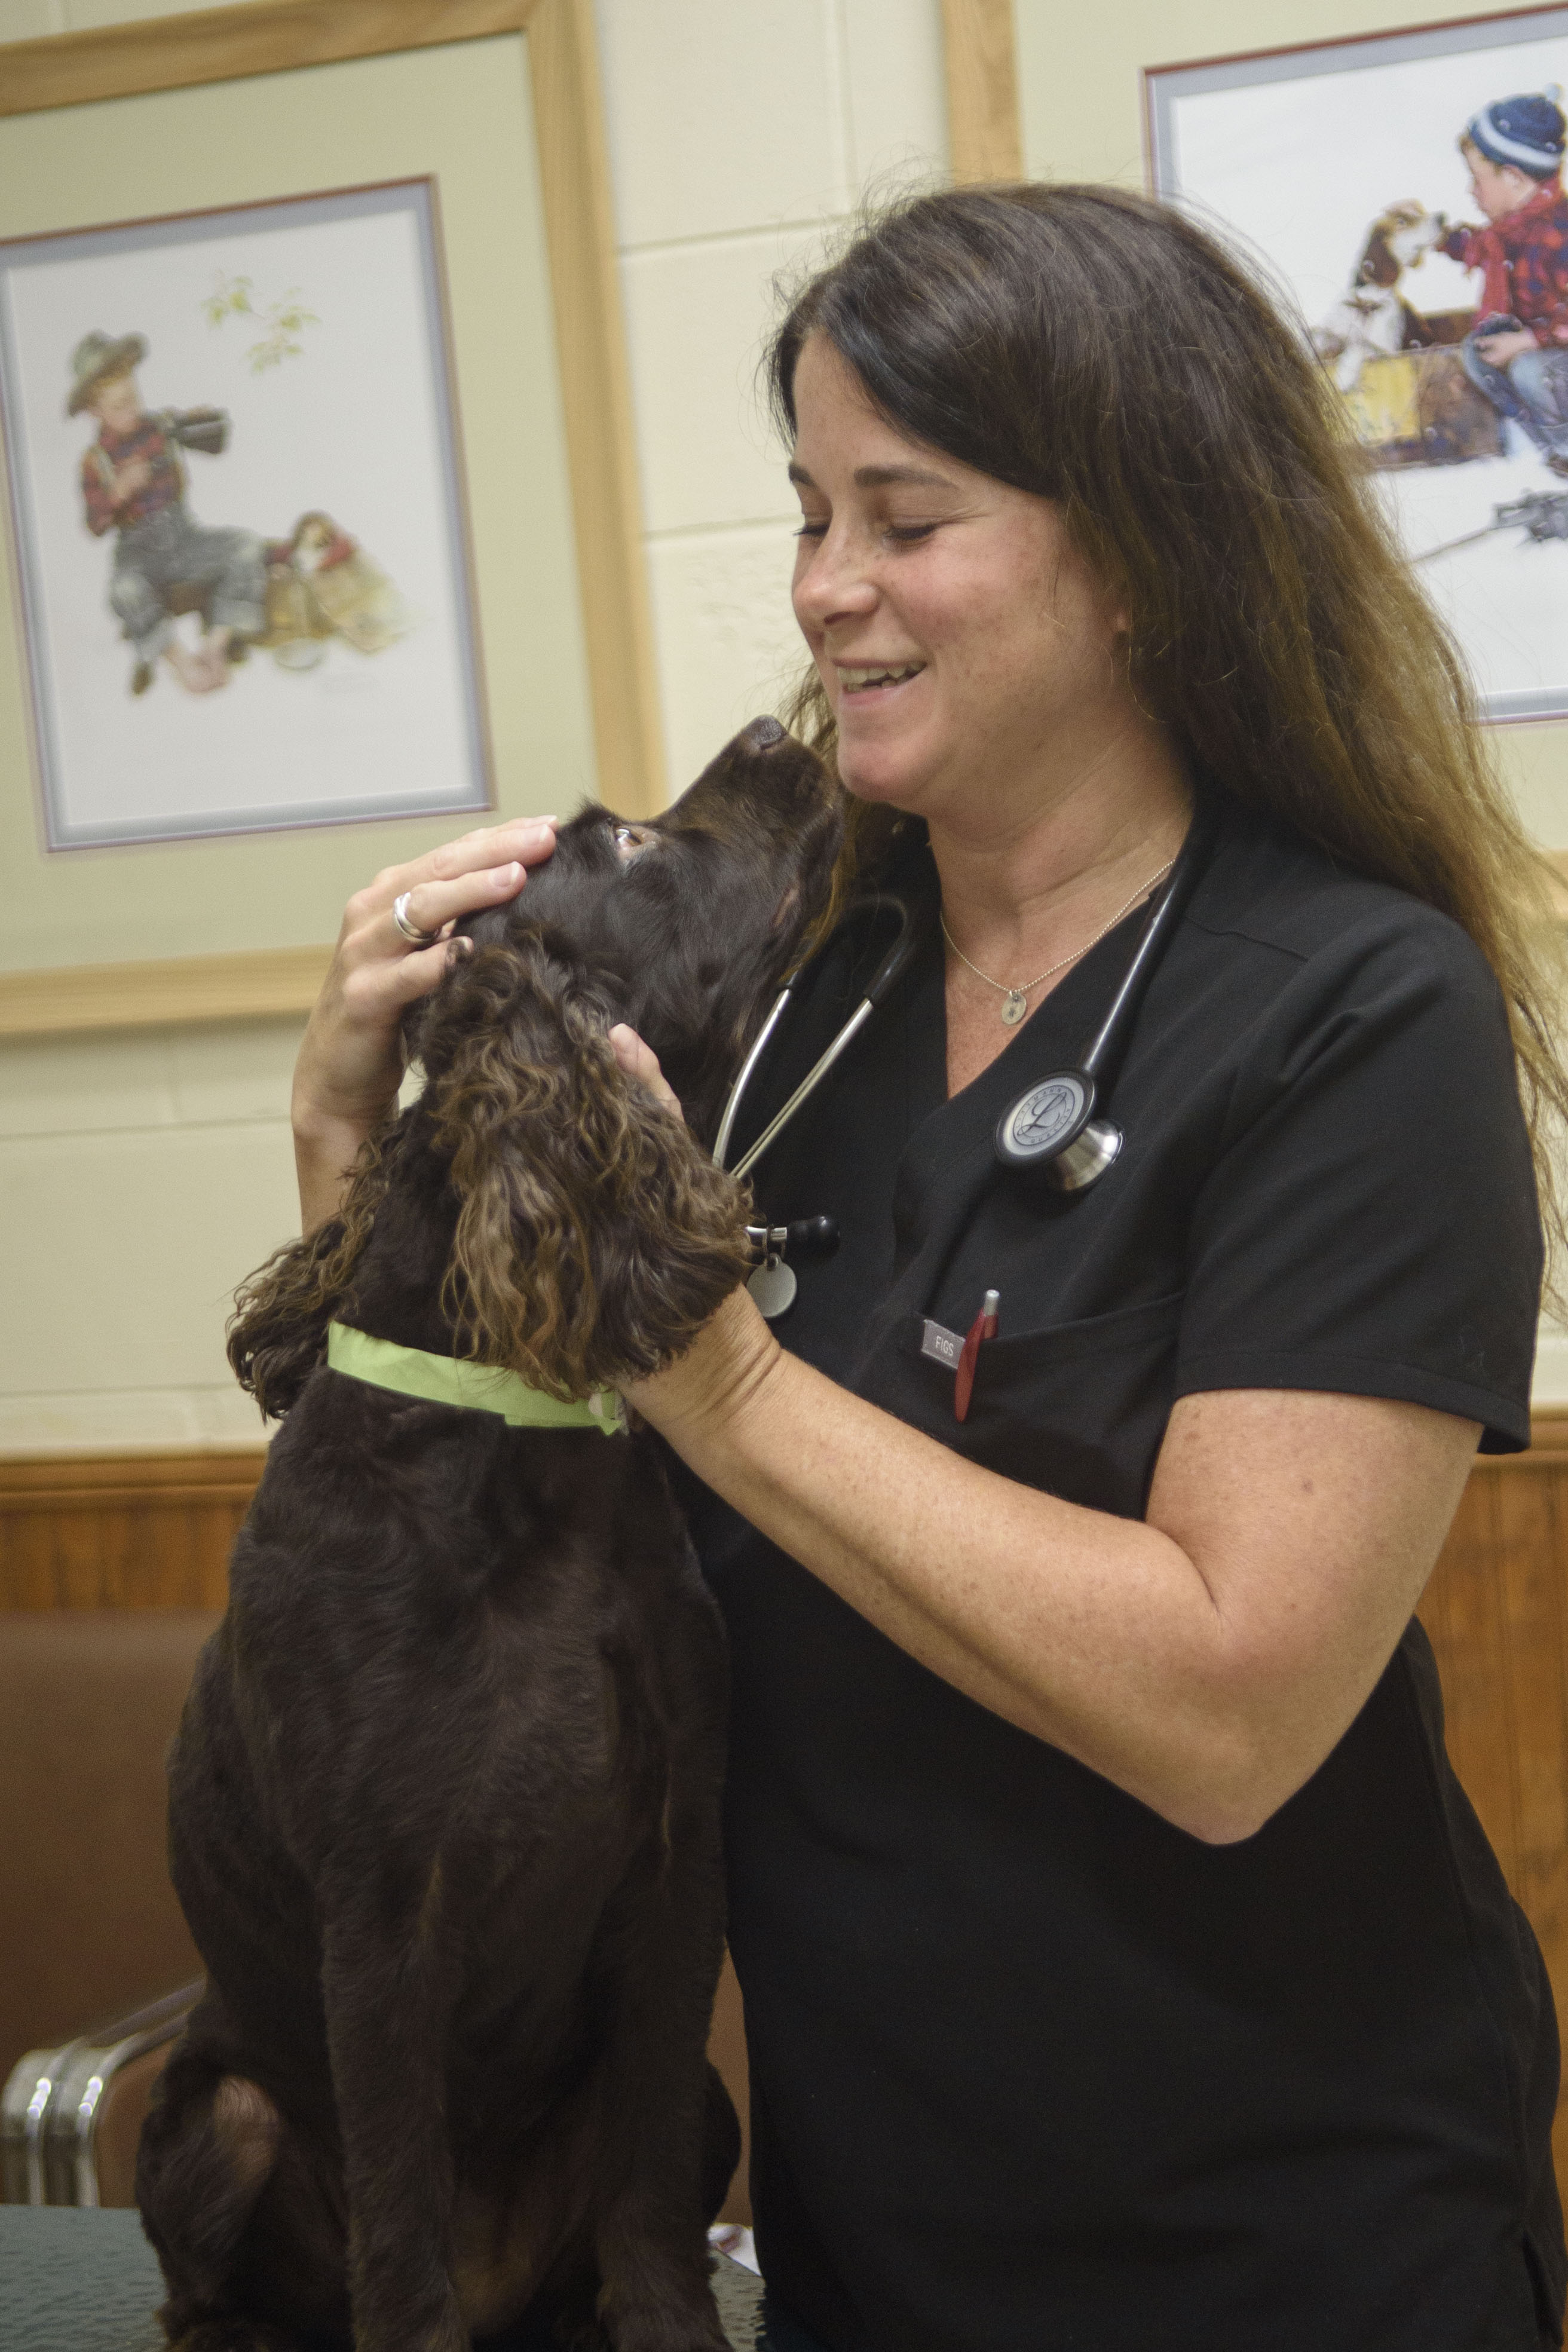 A dog patient looks up at its veterinarian